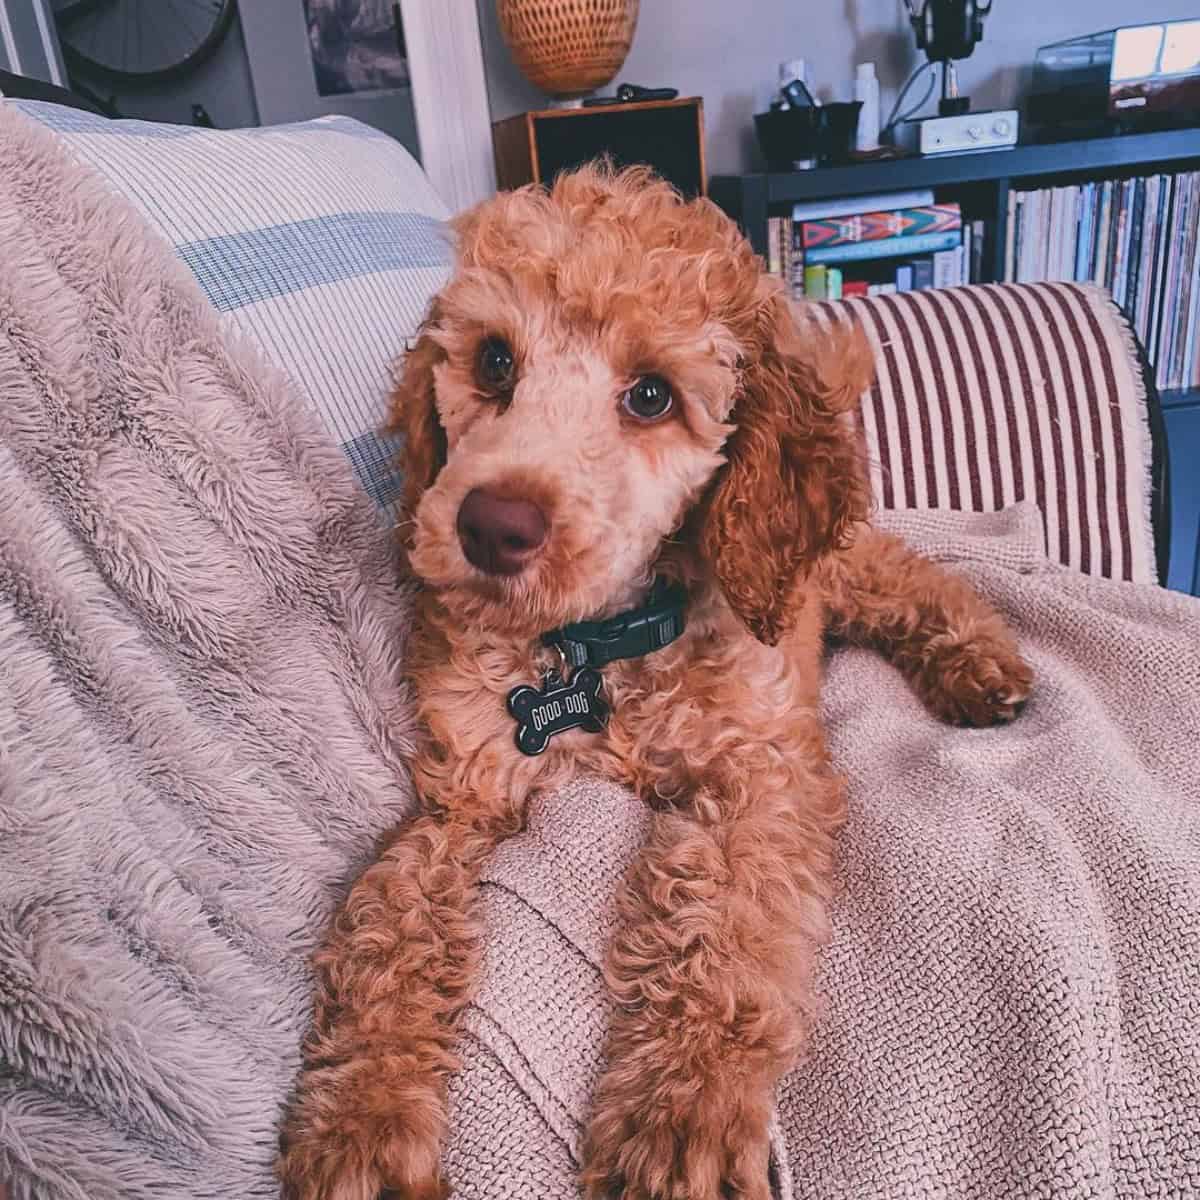 Poodle loves to stay on couch